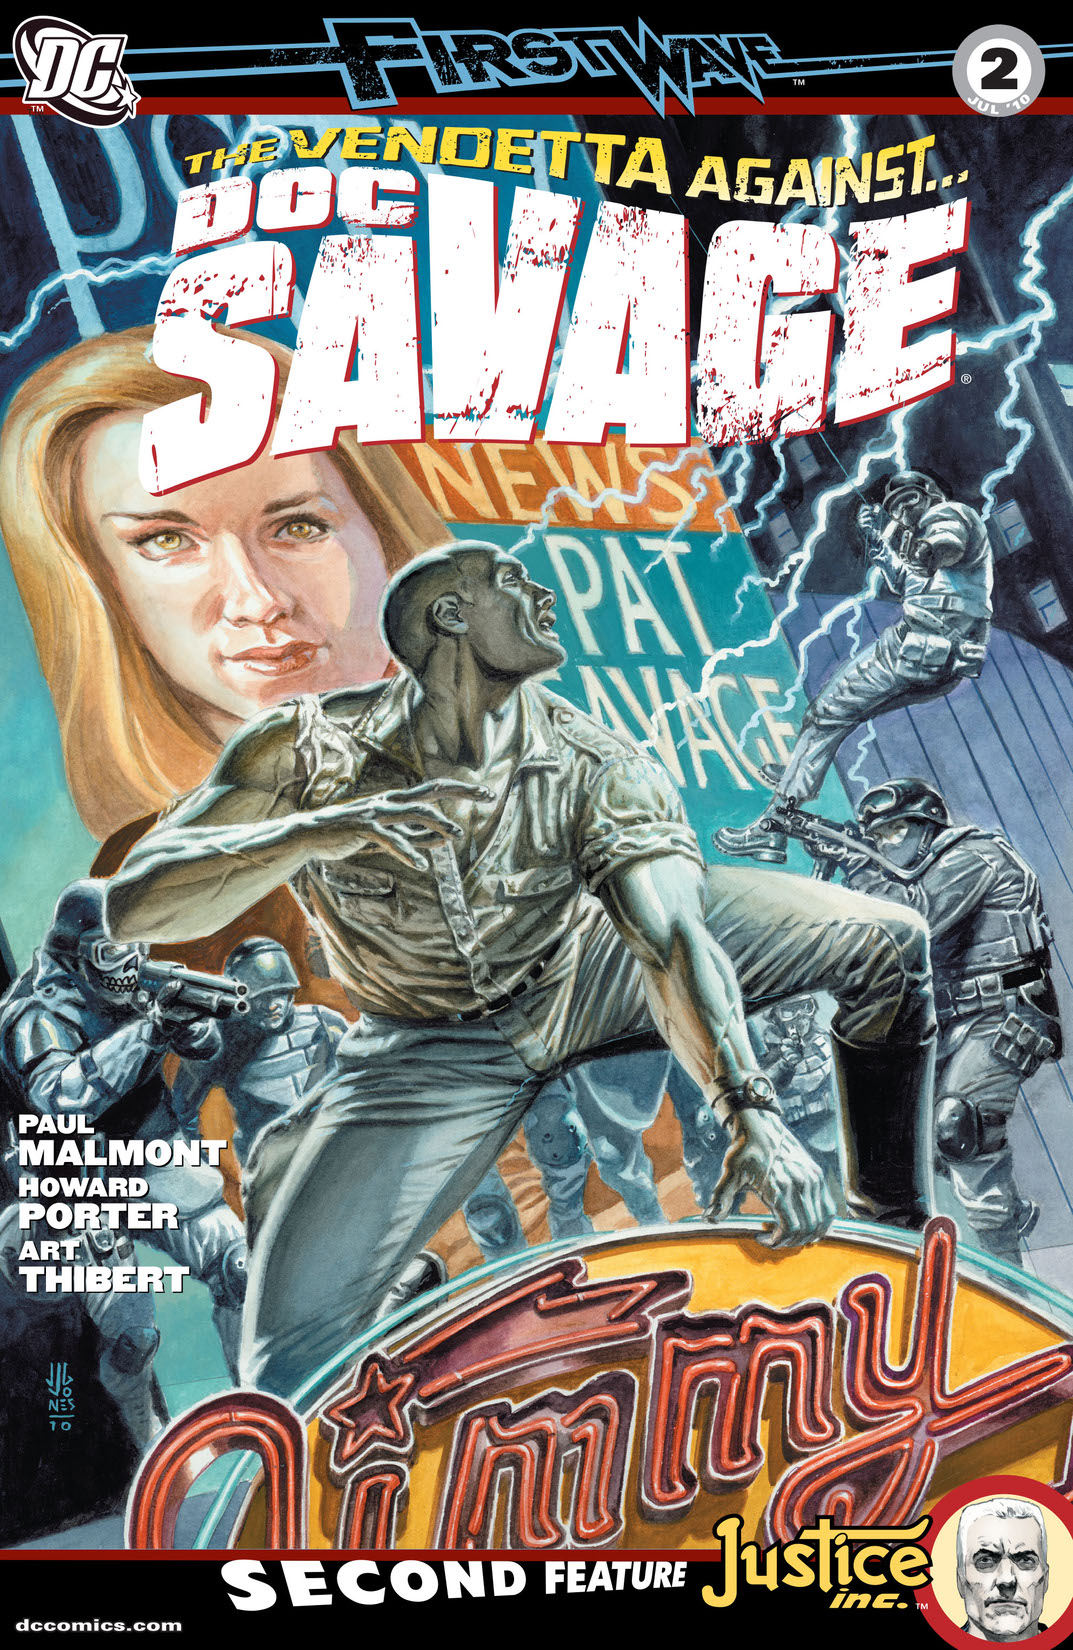 Doc Savage #2 preview images